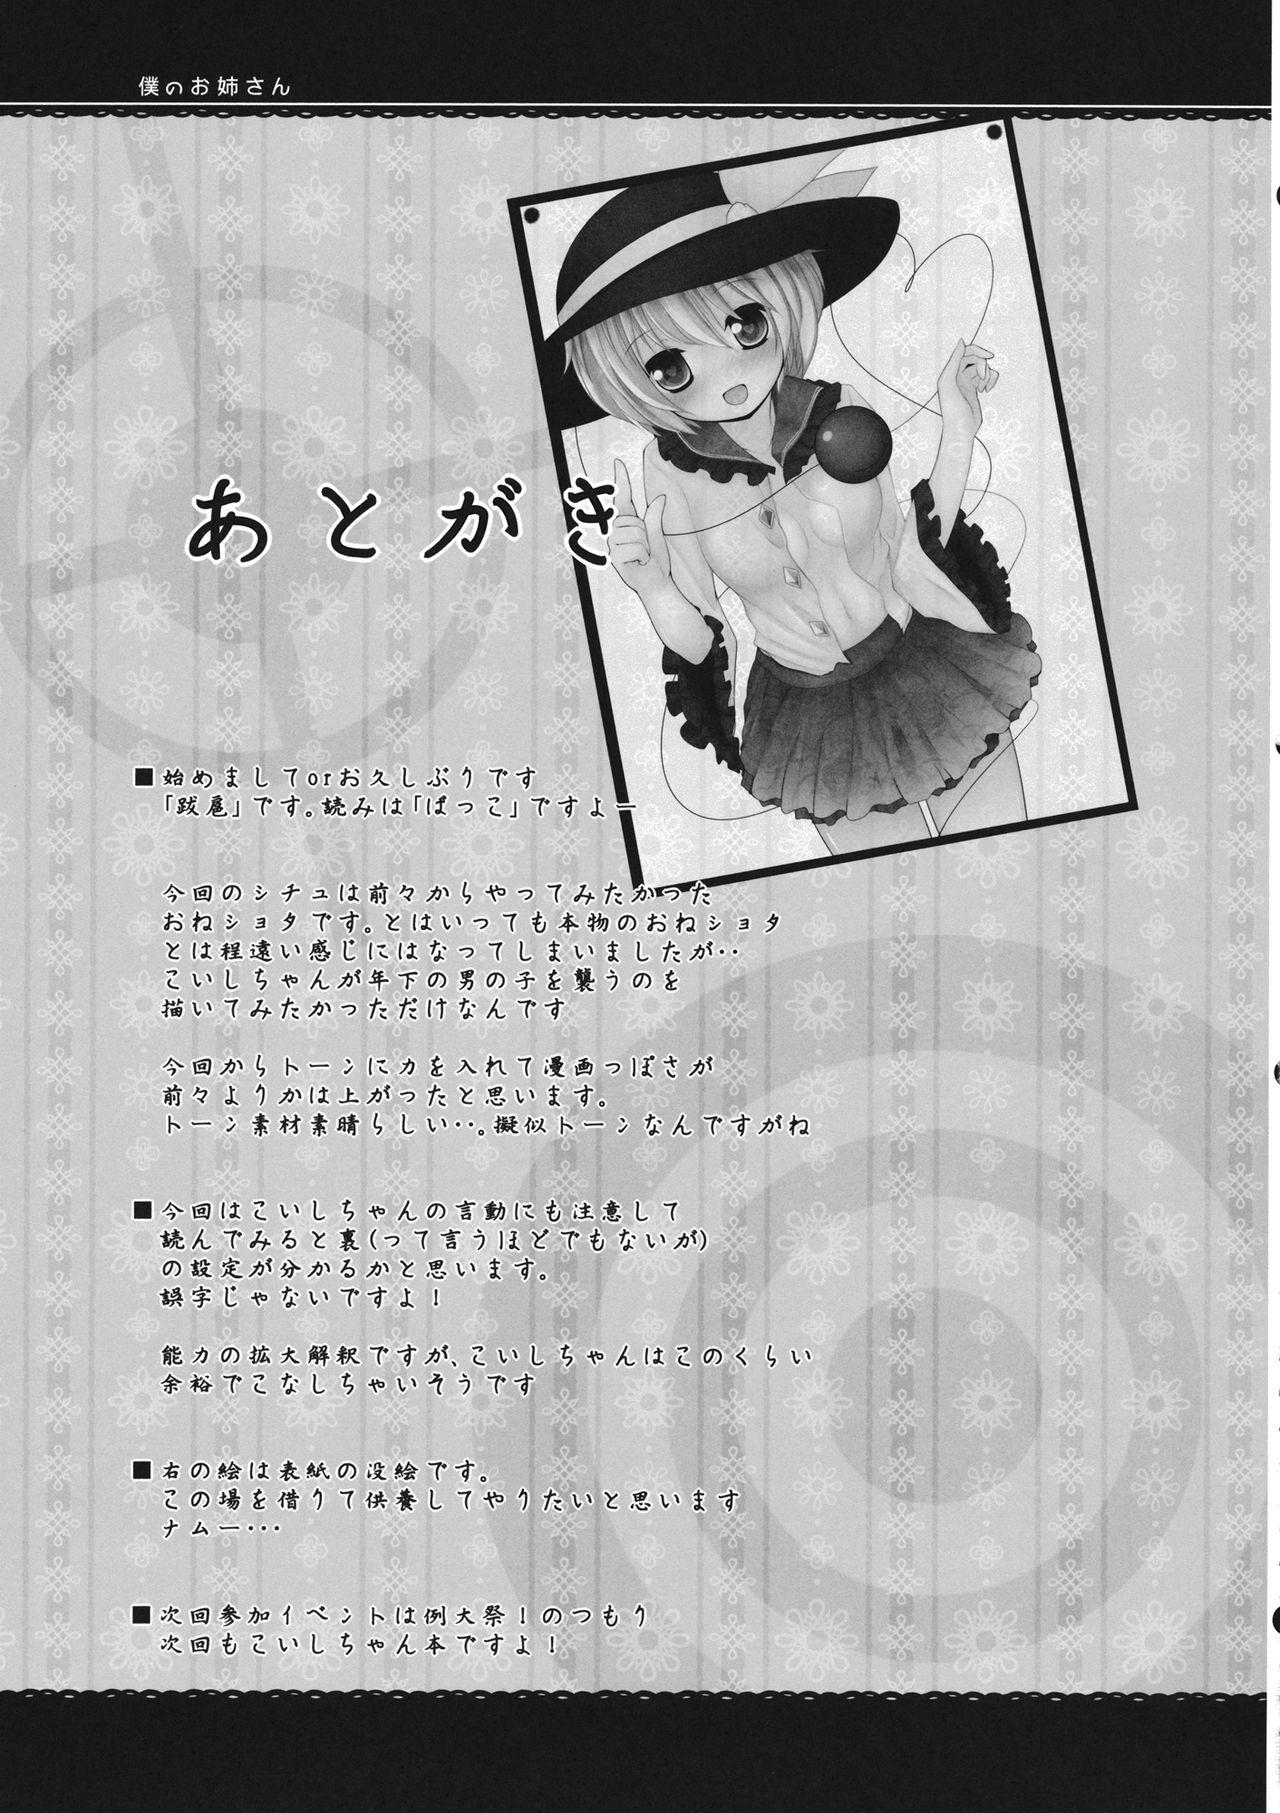 Little Boku no Onee-san! - Touhou project Dick Suckers - Page 20